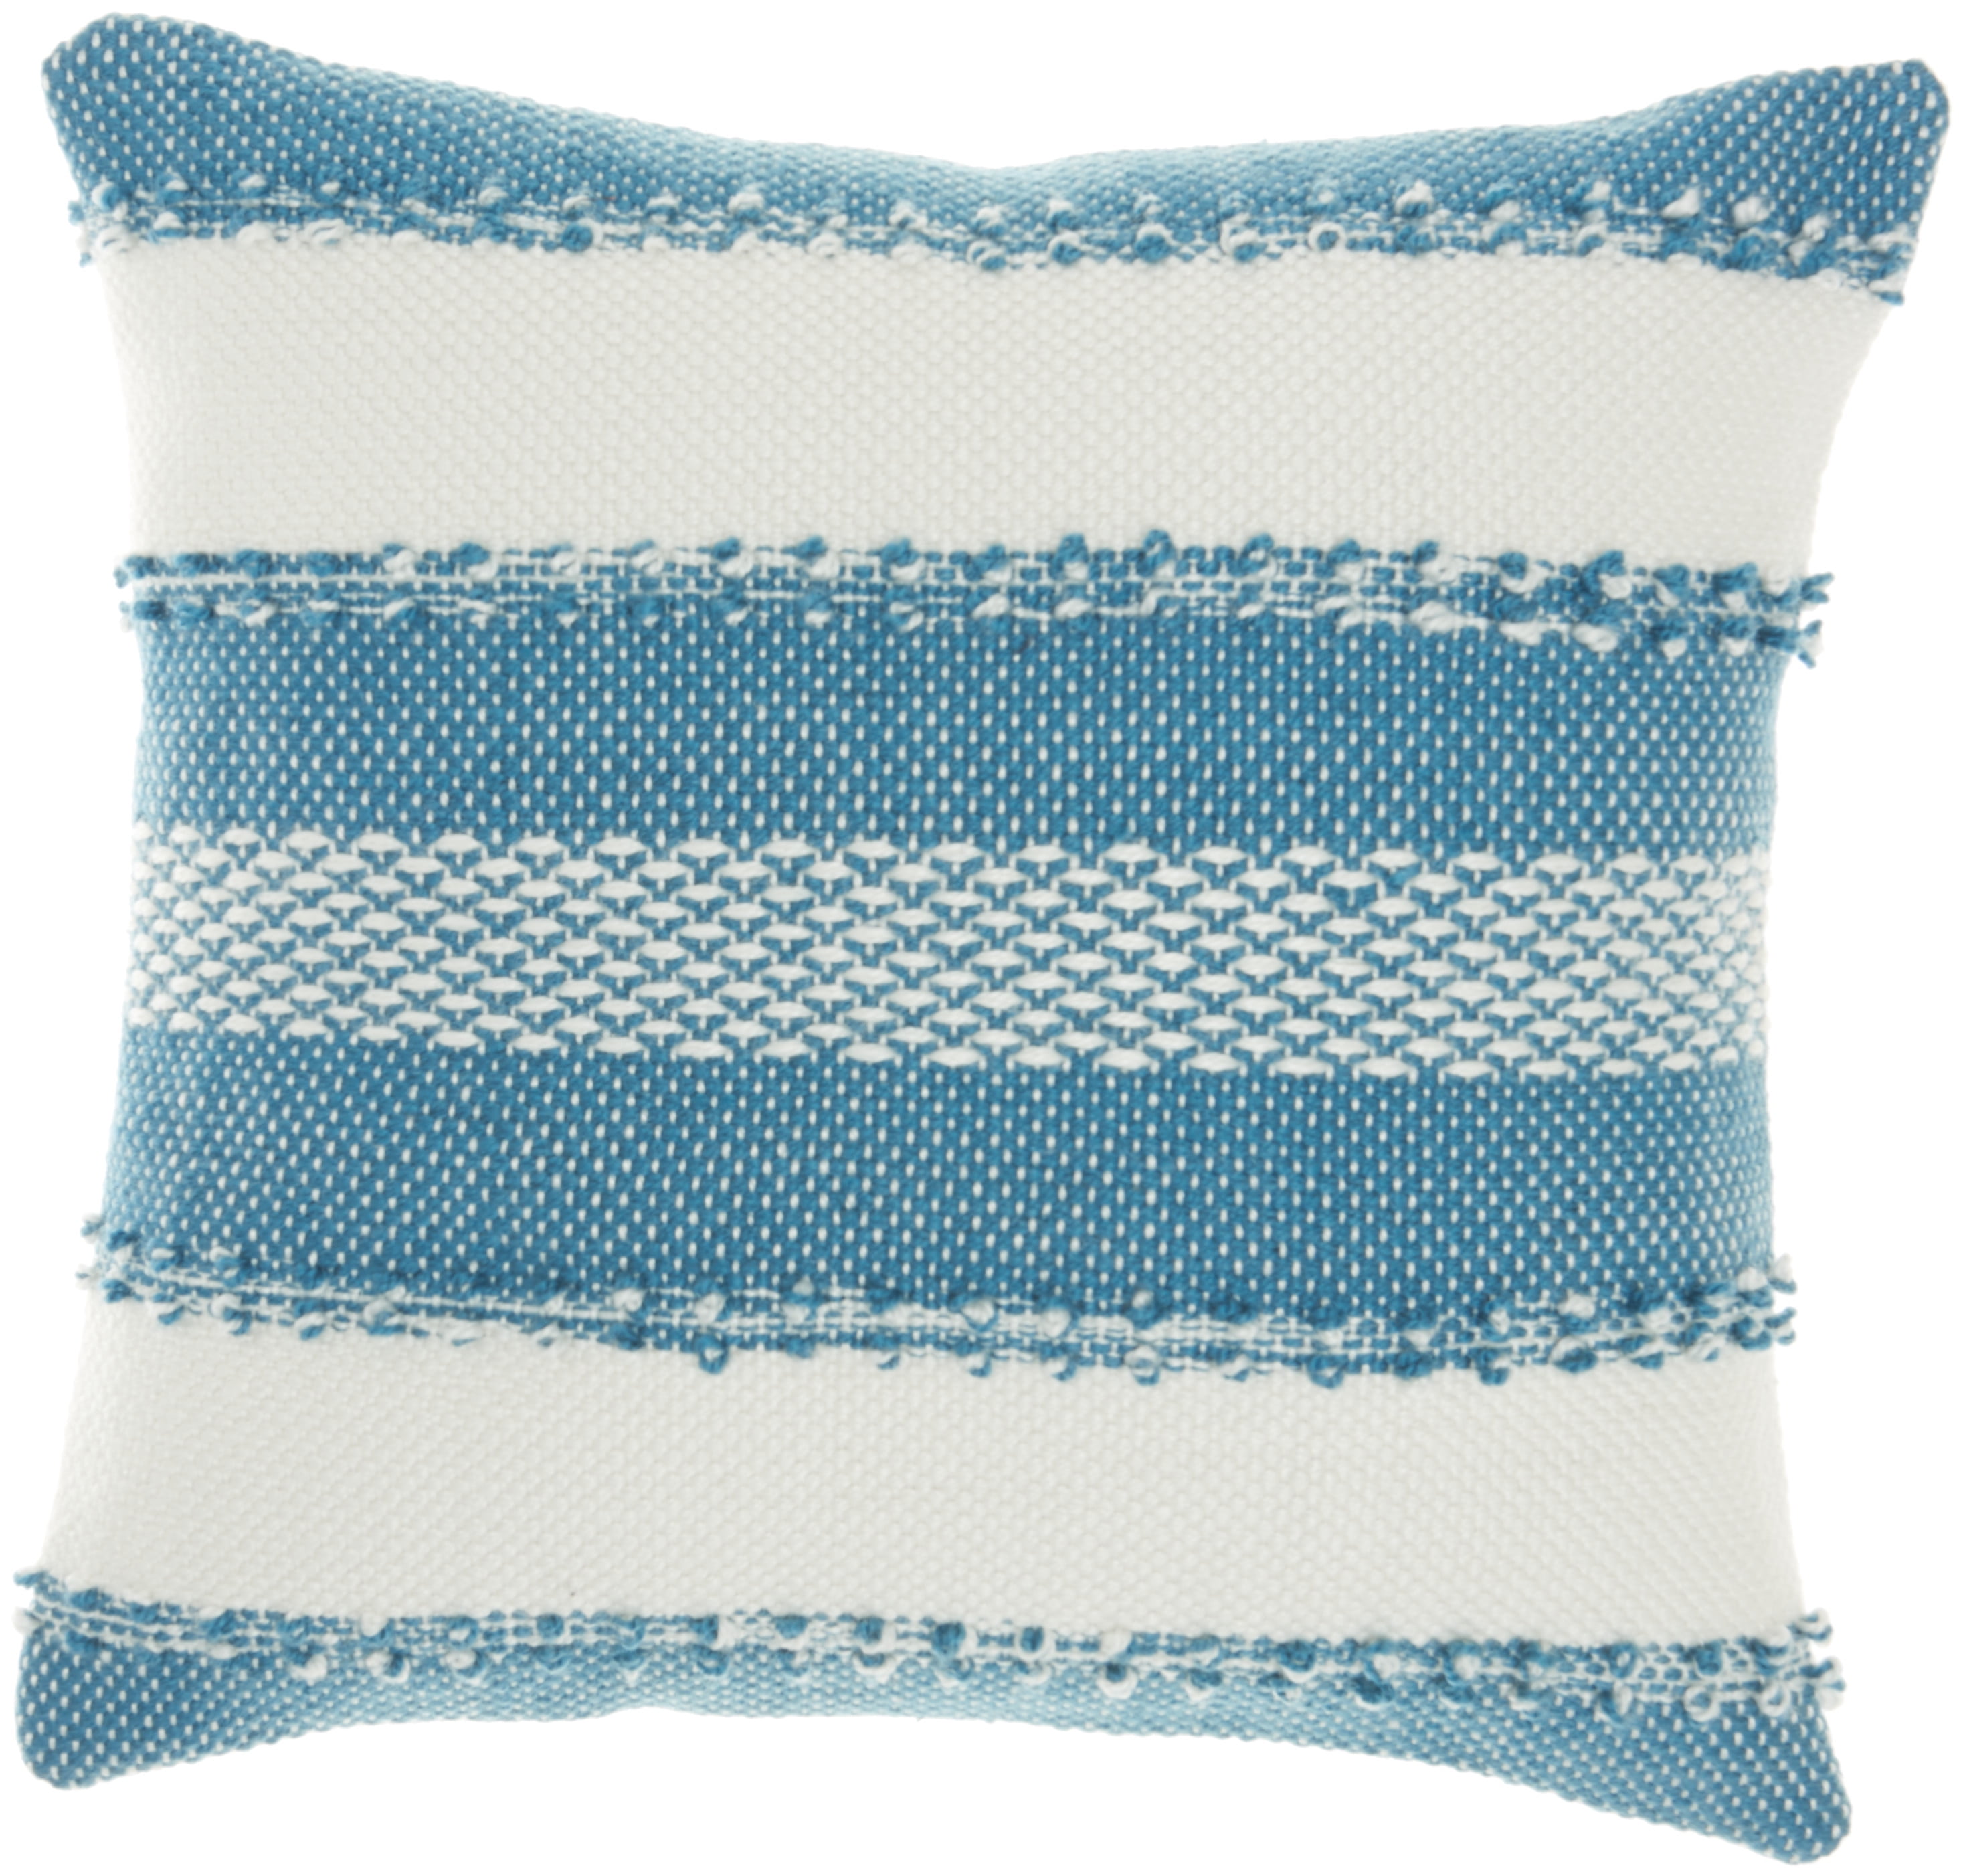 OUTDOOR Uneven Lines Throw Pillow or Cover, Teal/White Print 16, 18, 20 or  26 Sq Pillows/Covers, Striped/Stripe/Line Turquoise Blue